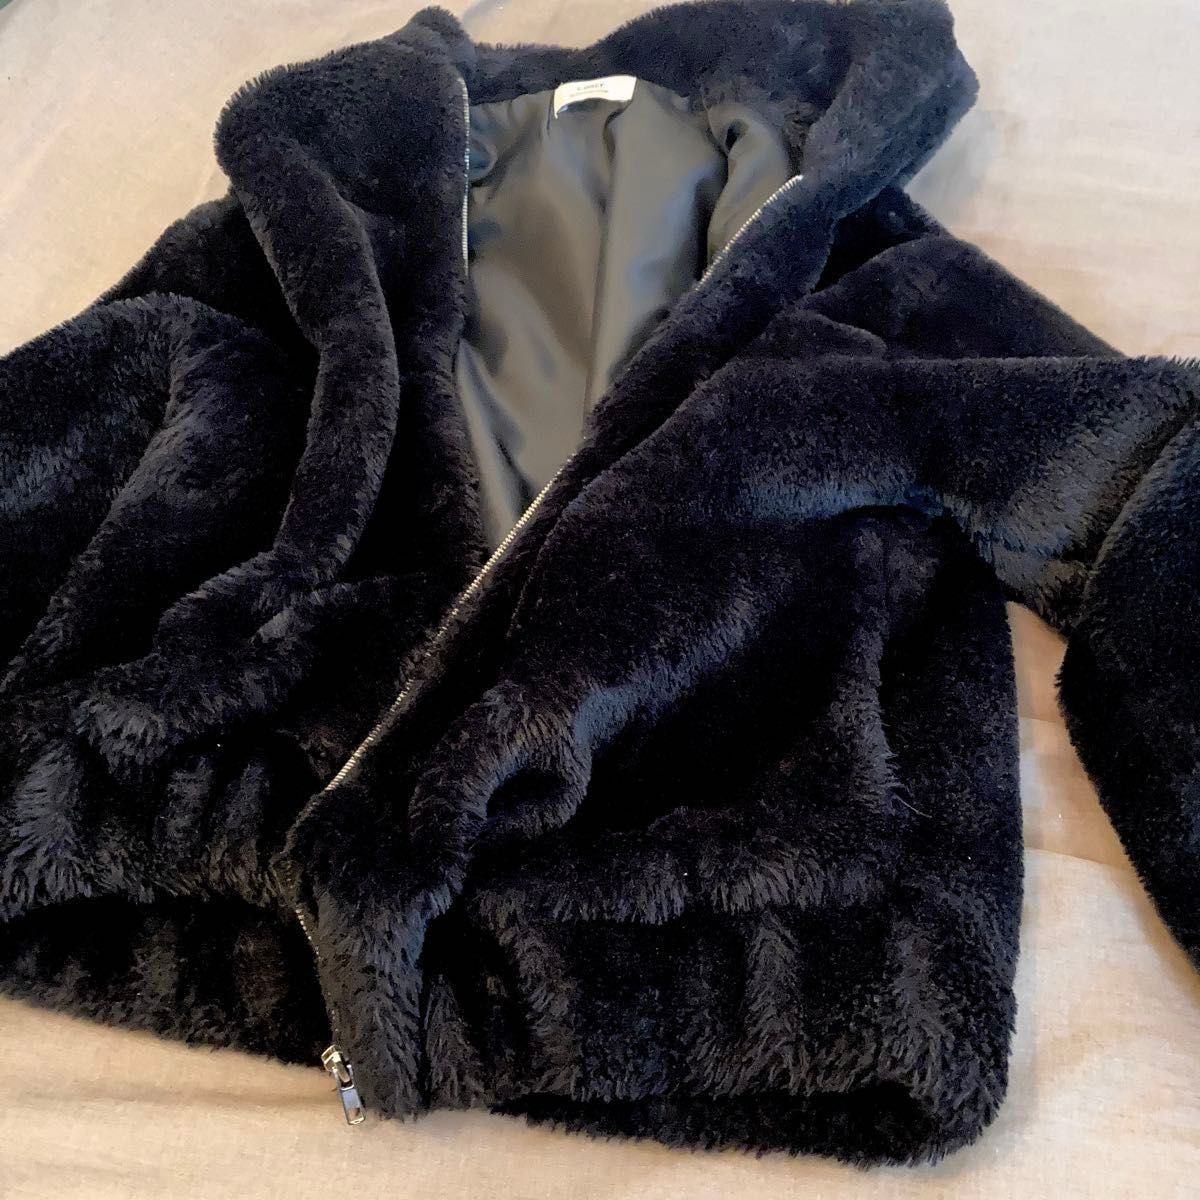 Raucohouse fur hoodie jacket (one size)